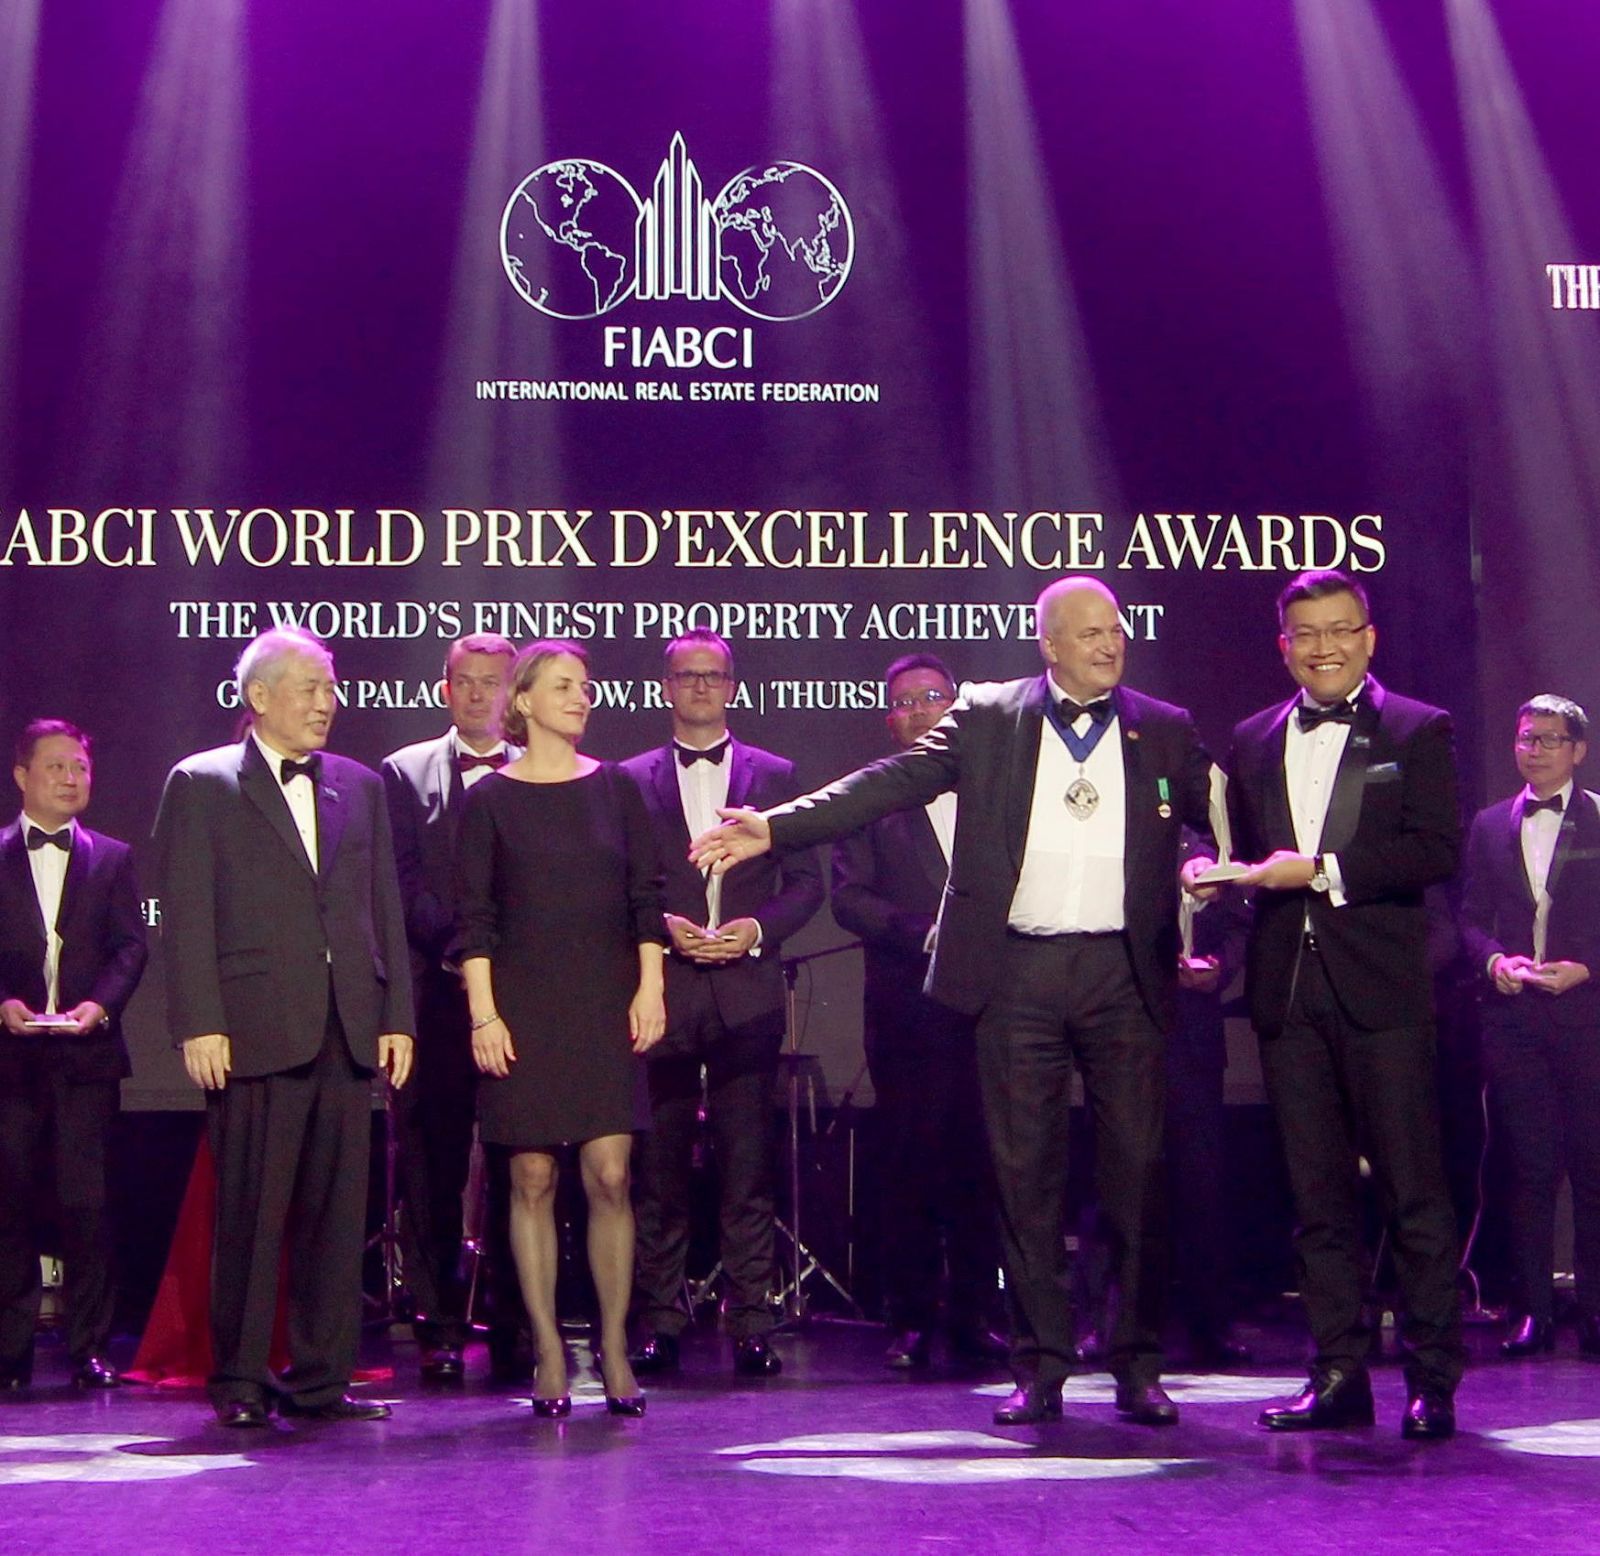 Gamuda Land’s representative (first from right) receiving the Master Plan Category silver award from Assen Makedonov, FIABCI World president at the FIABCI World Prix d’Excellence Awards 2019 in Moscow, Russia.